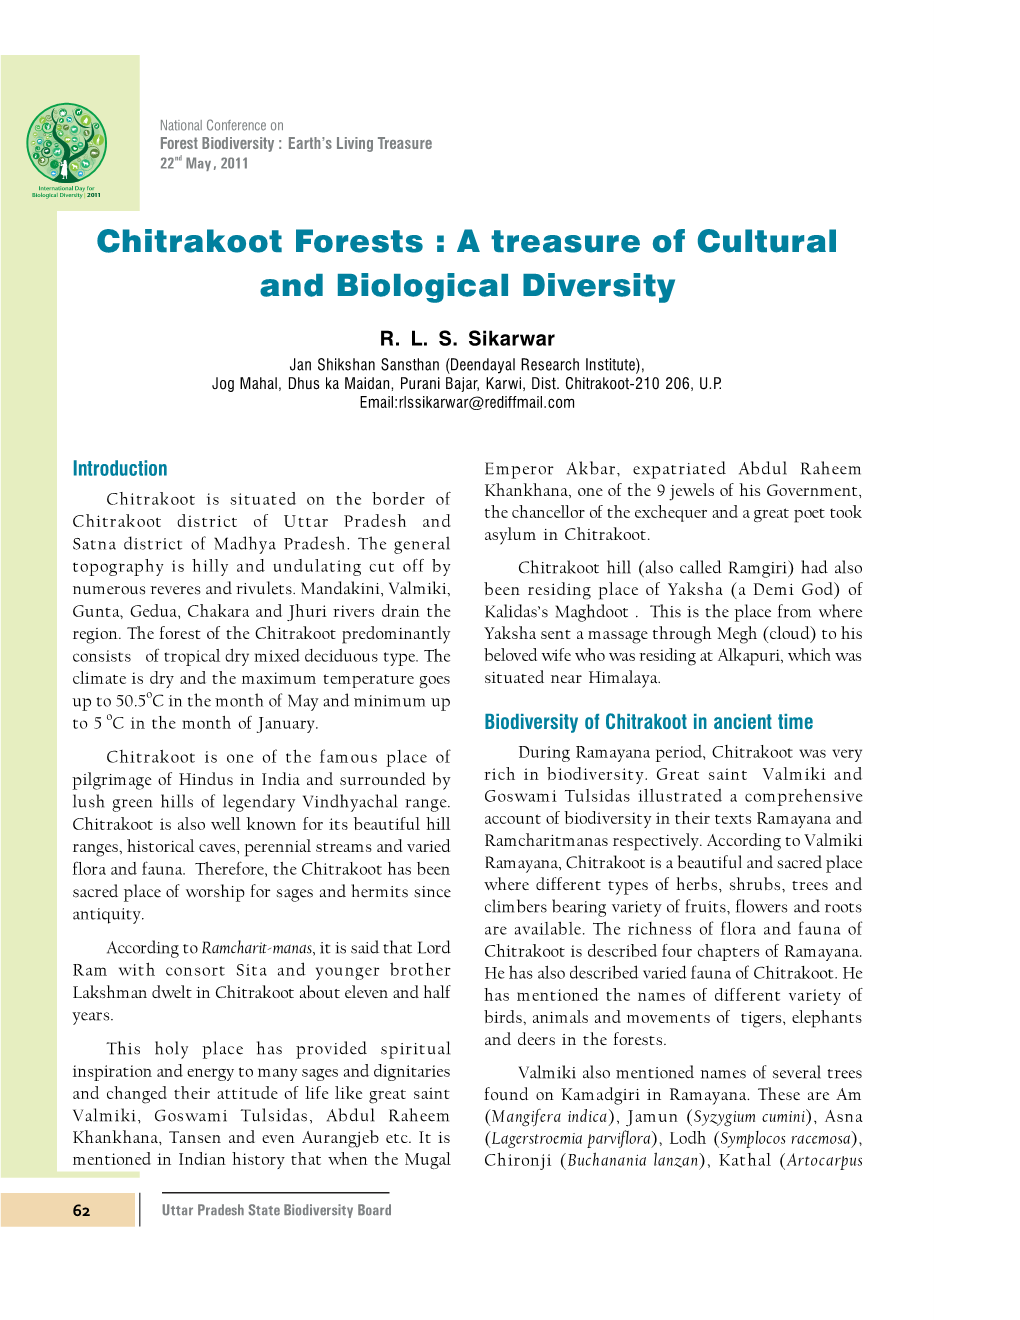 Chitrakoot Forests : a Treasure of Cultural and Biological Diversity